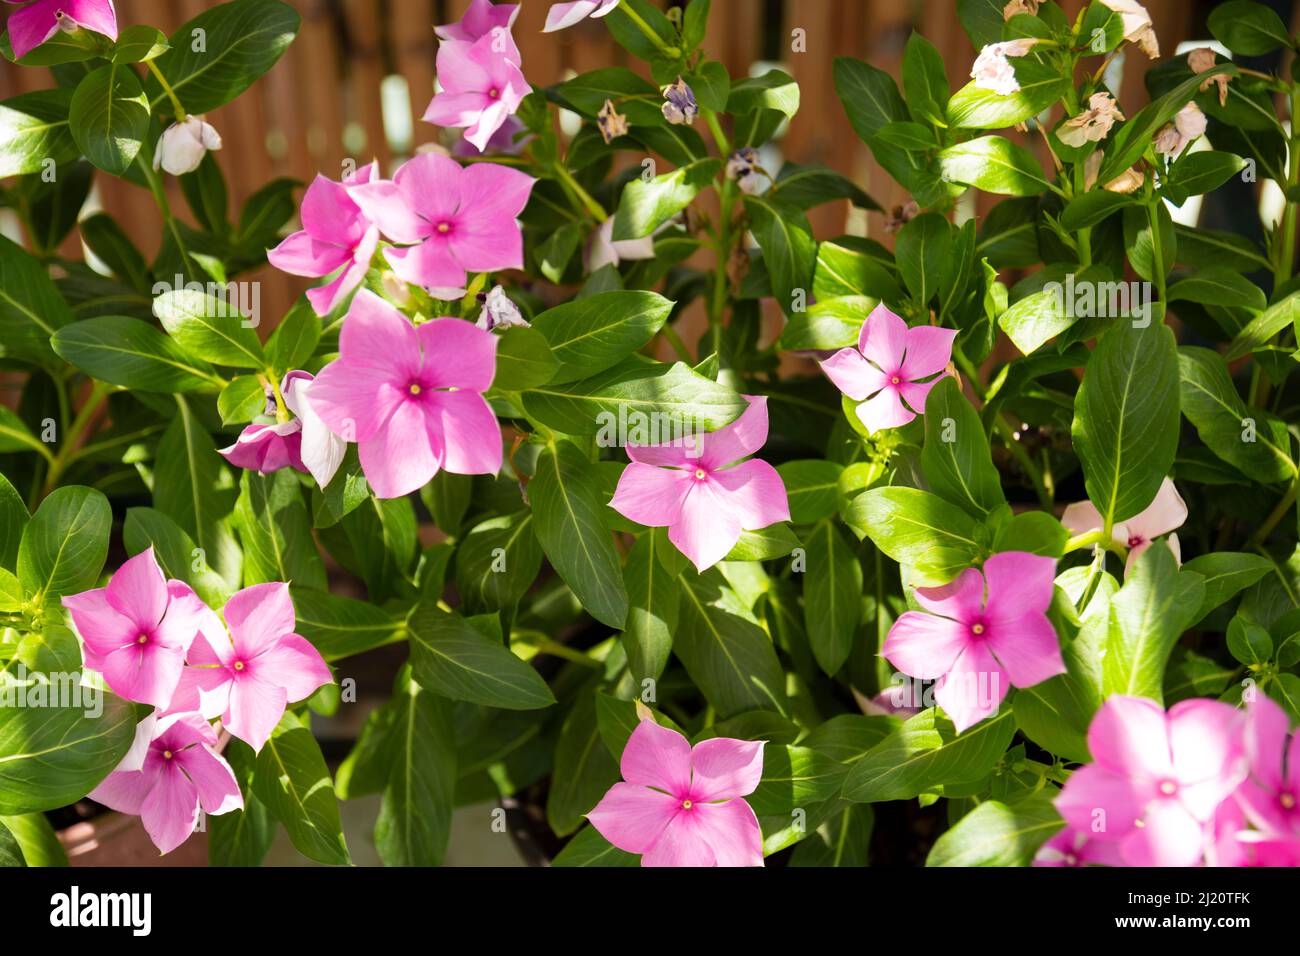 Catharanthus roseus, commonly known as bright eyes, Cape periwinkle, graveyard plant, Madagascar periwinkle, old maid, pink or rose periwinkle. Select Stock Photo